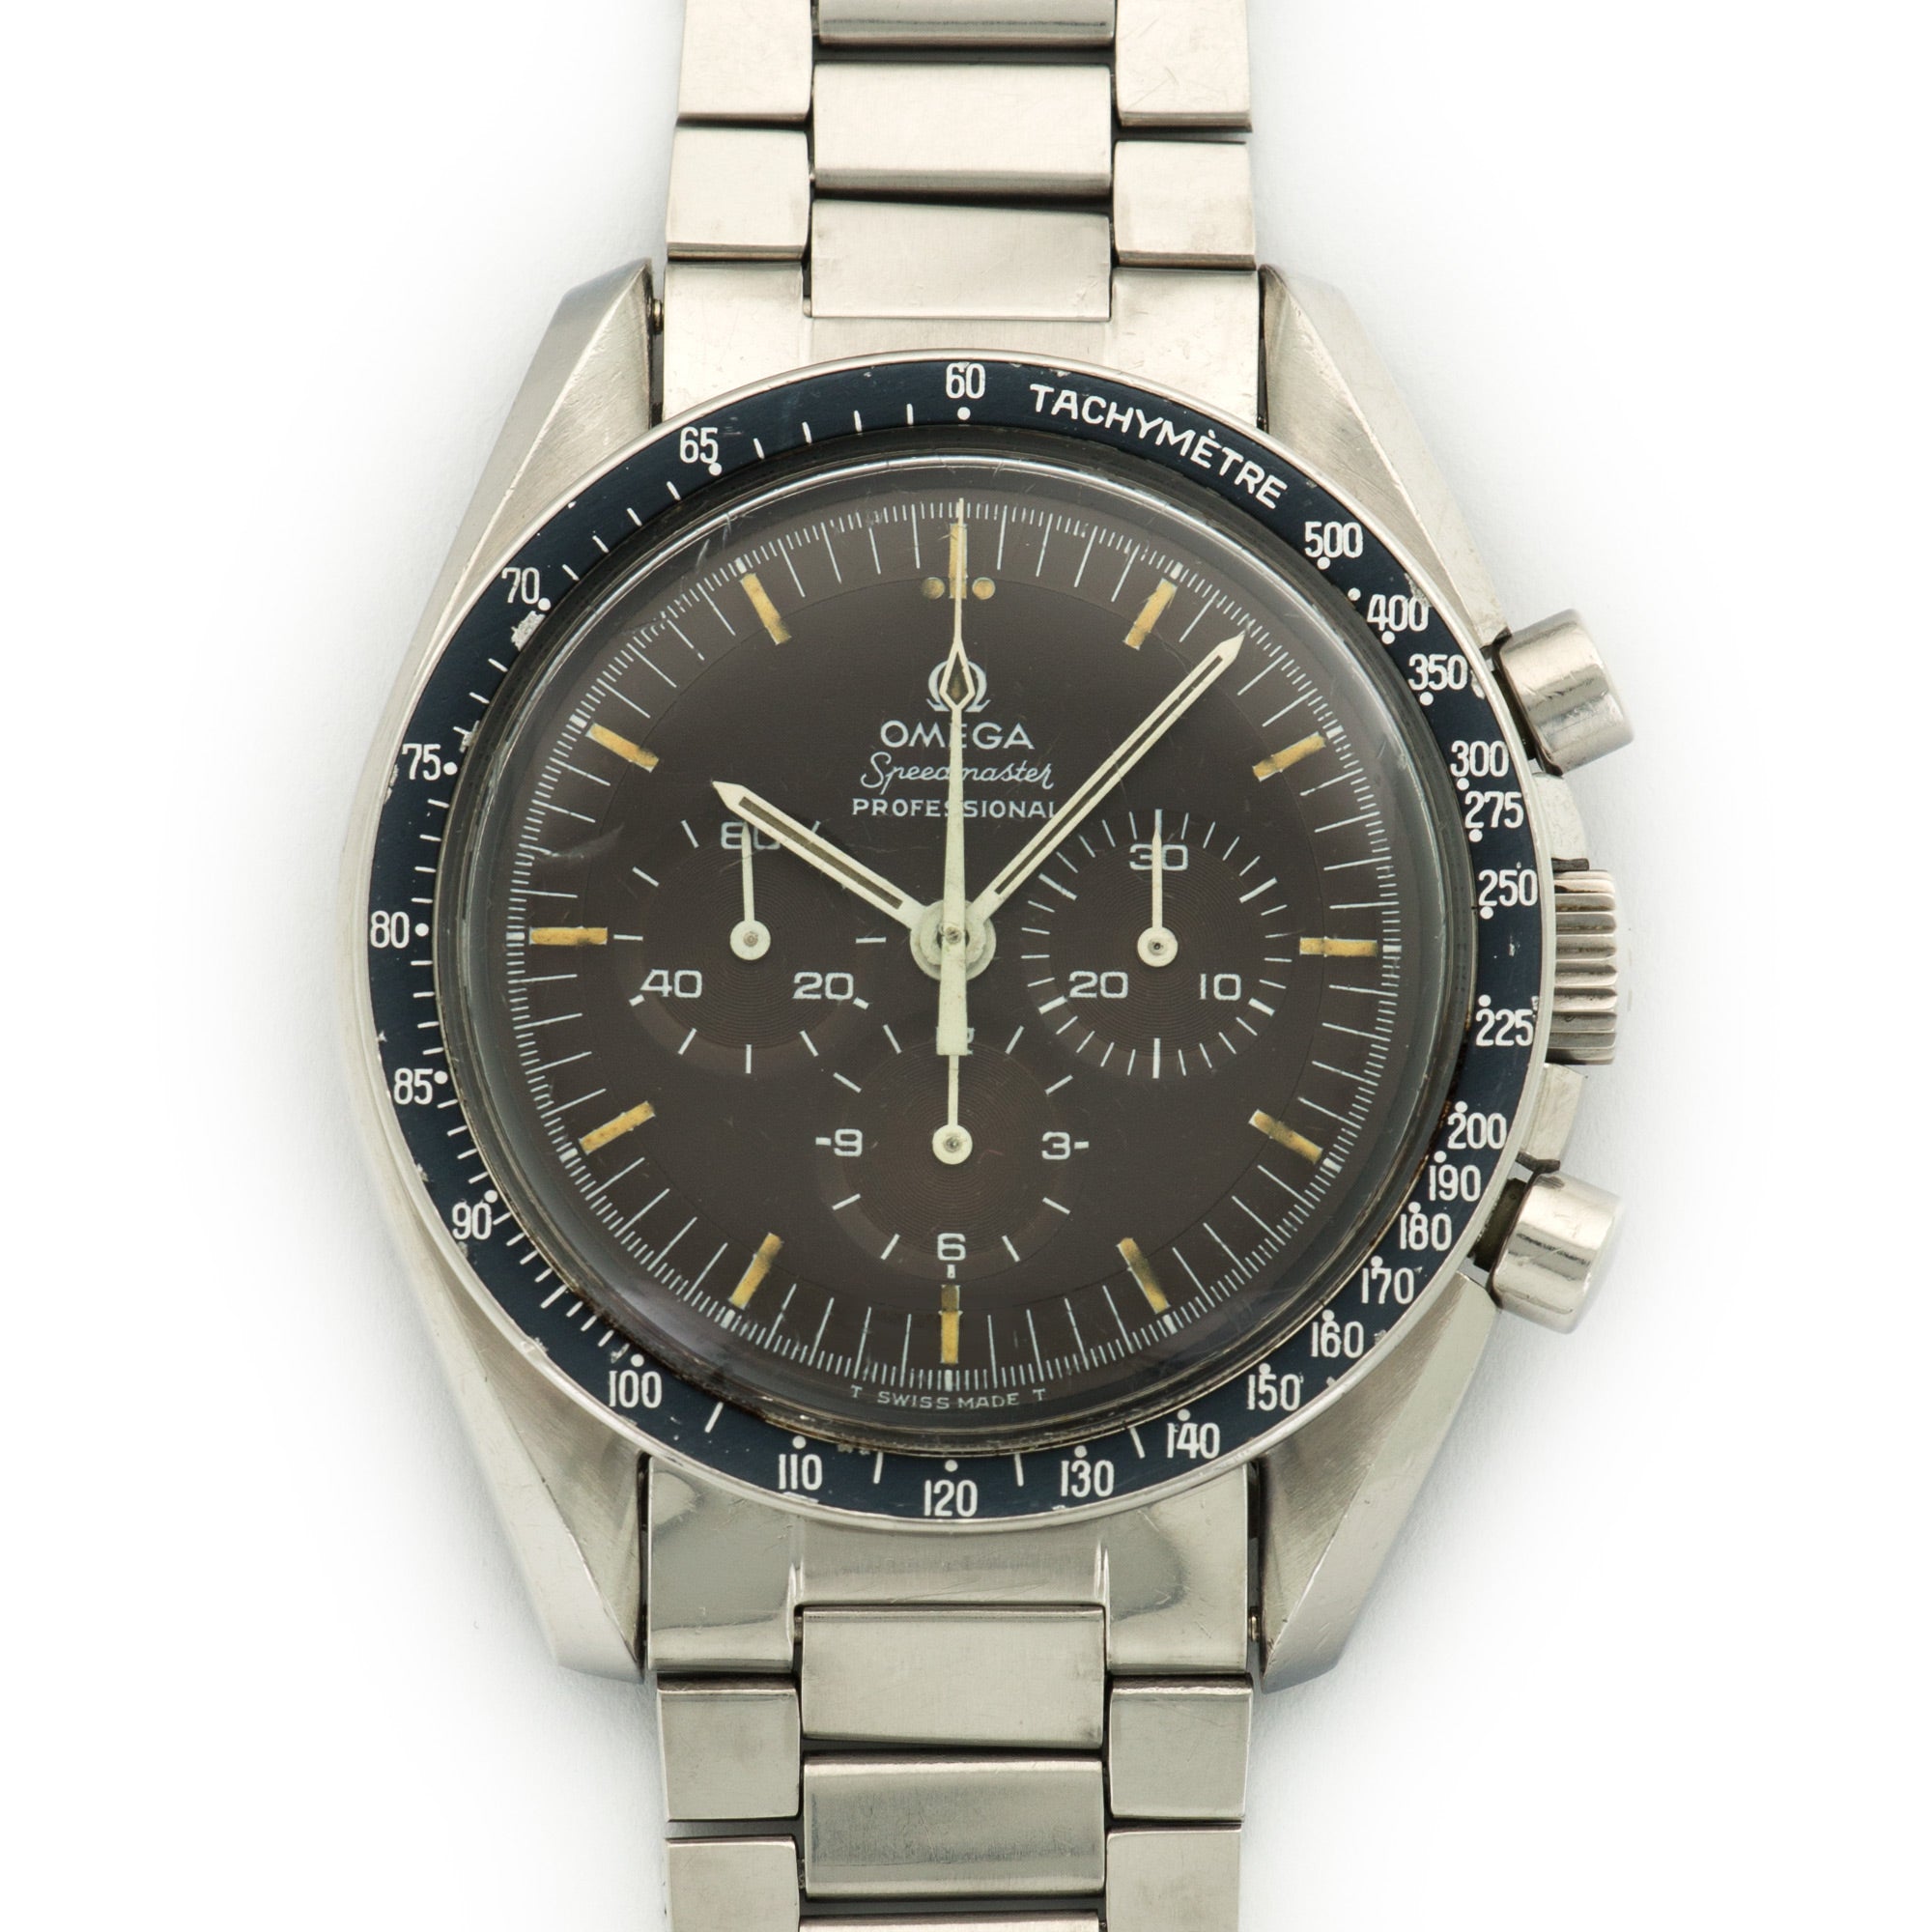 Omega - Omega Speedmaster Professional Tropical Brown Ref. 145.022 - The Keystone Watches